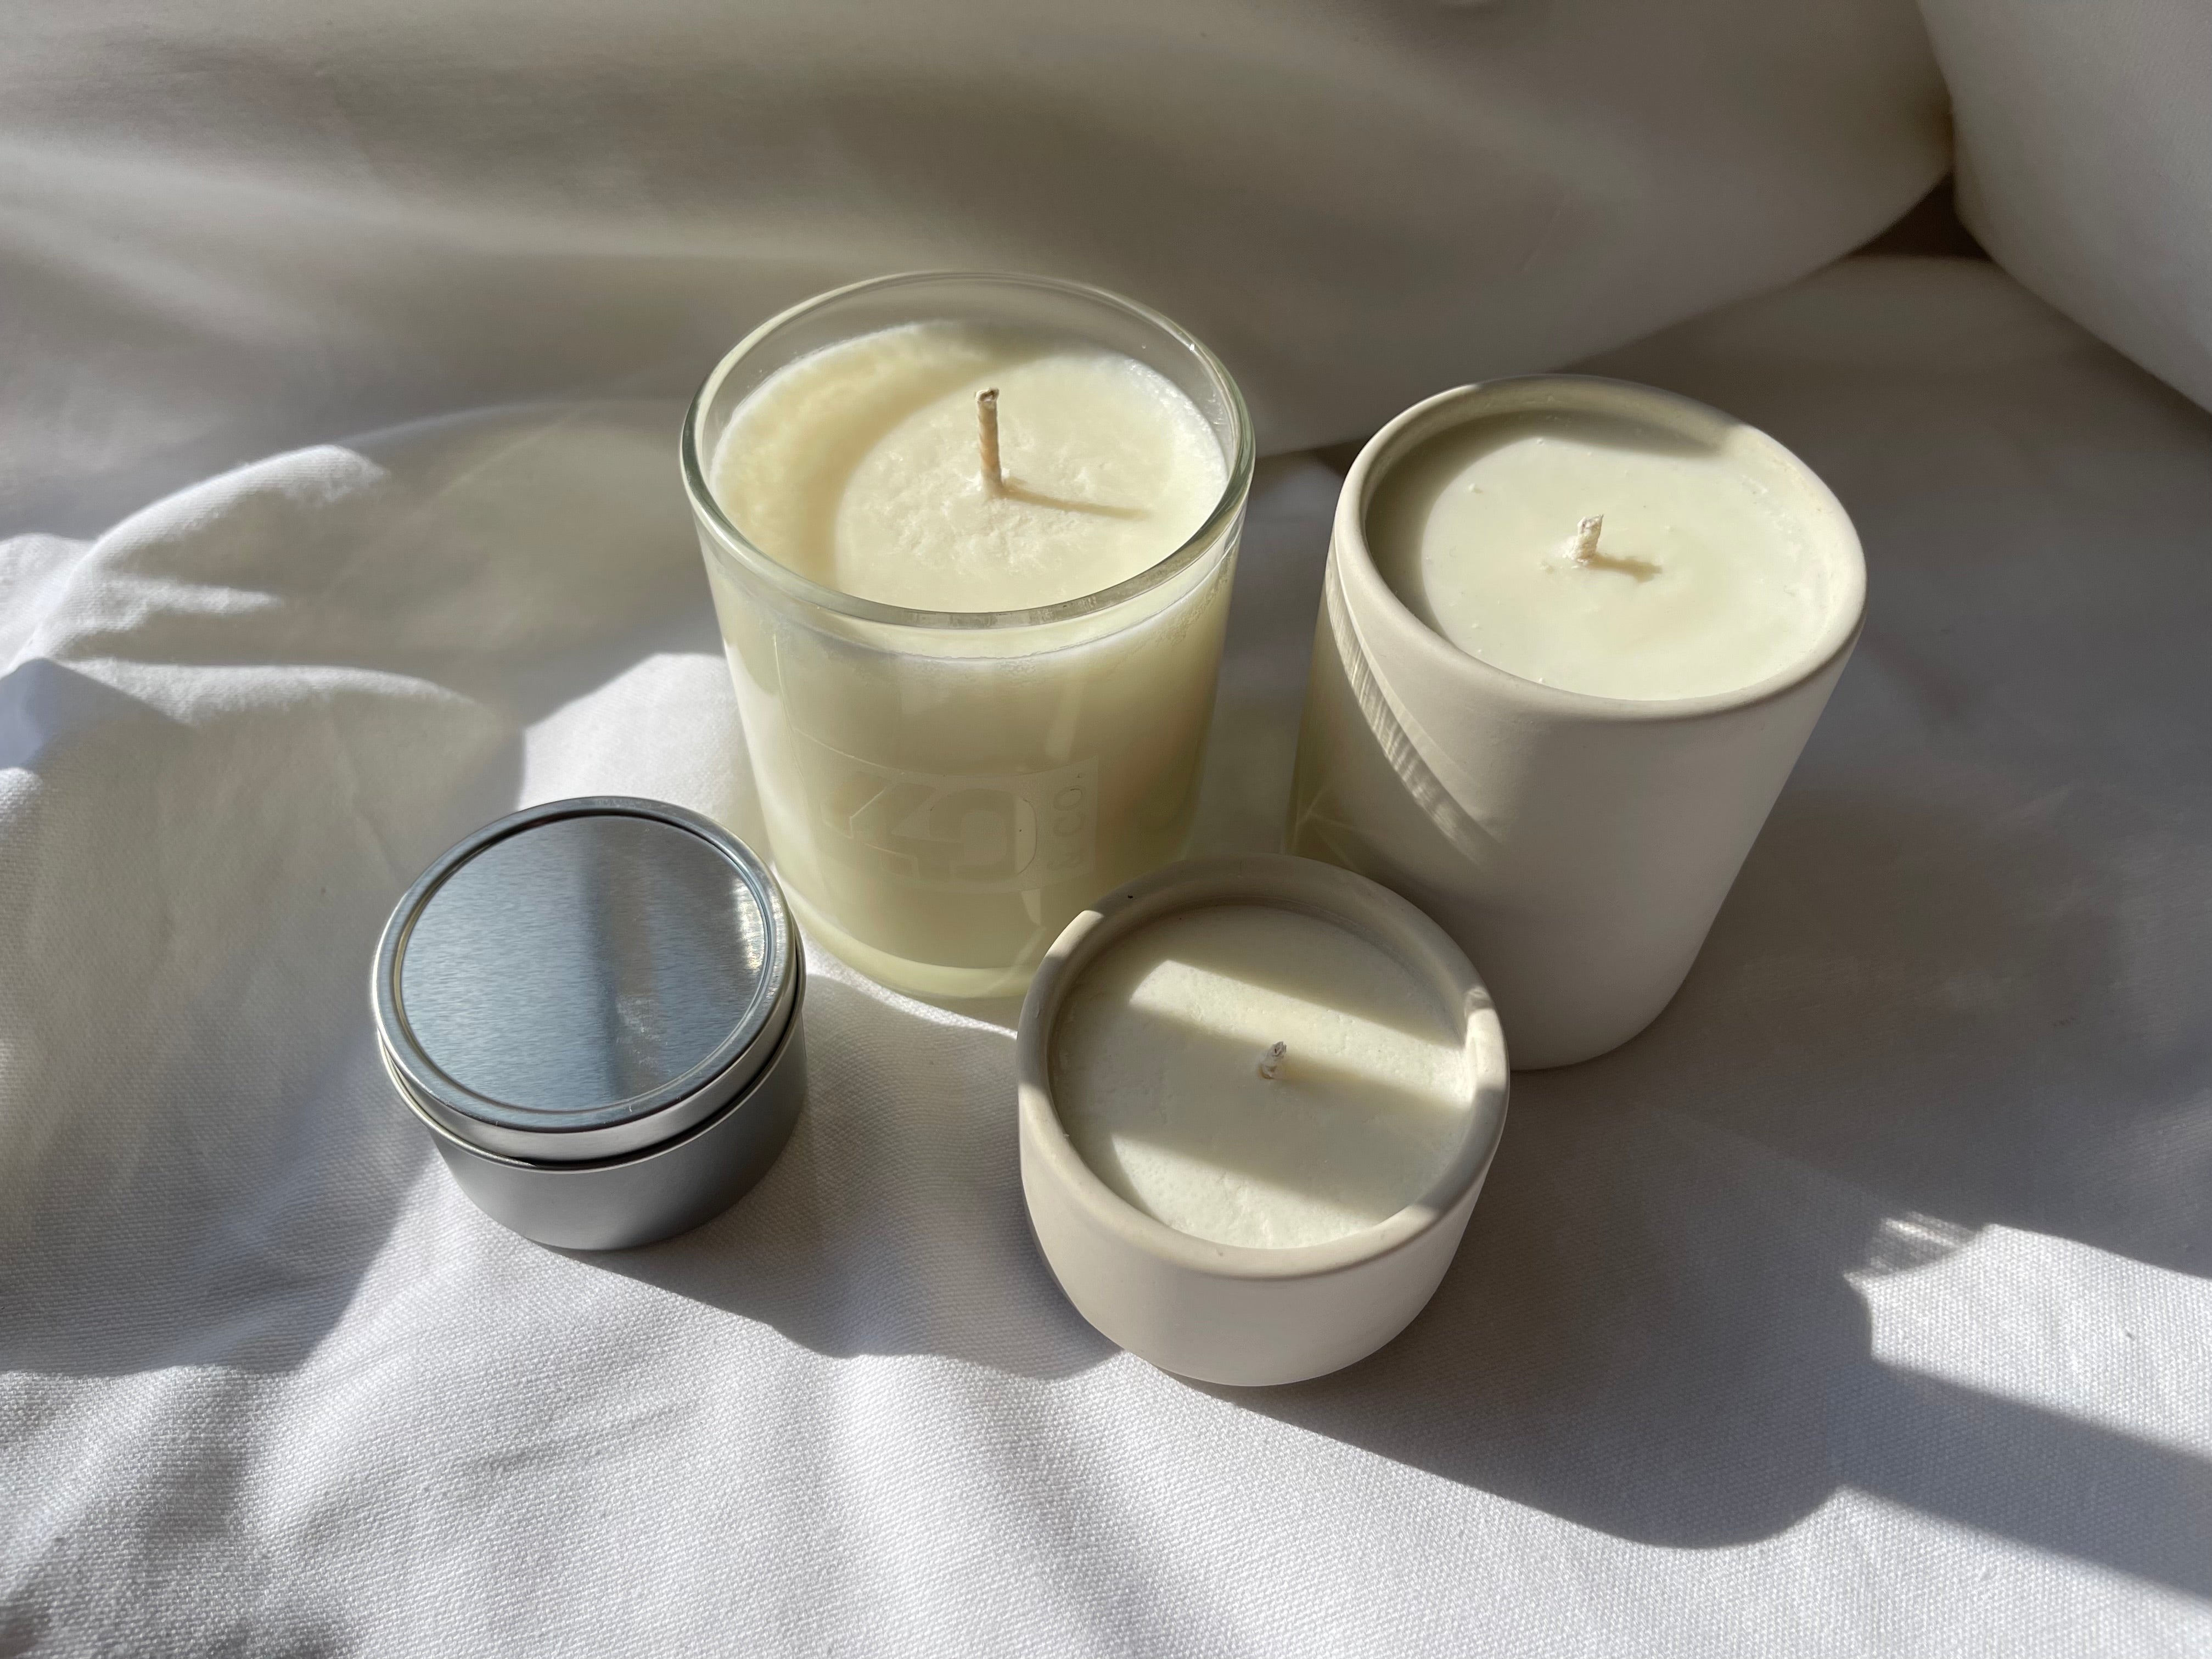 tombstone candle | multiple options